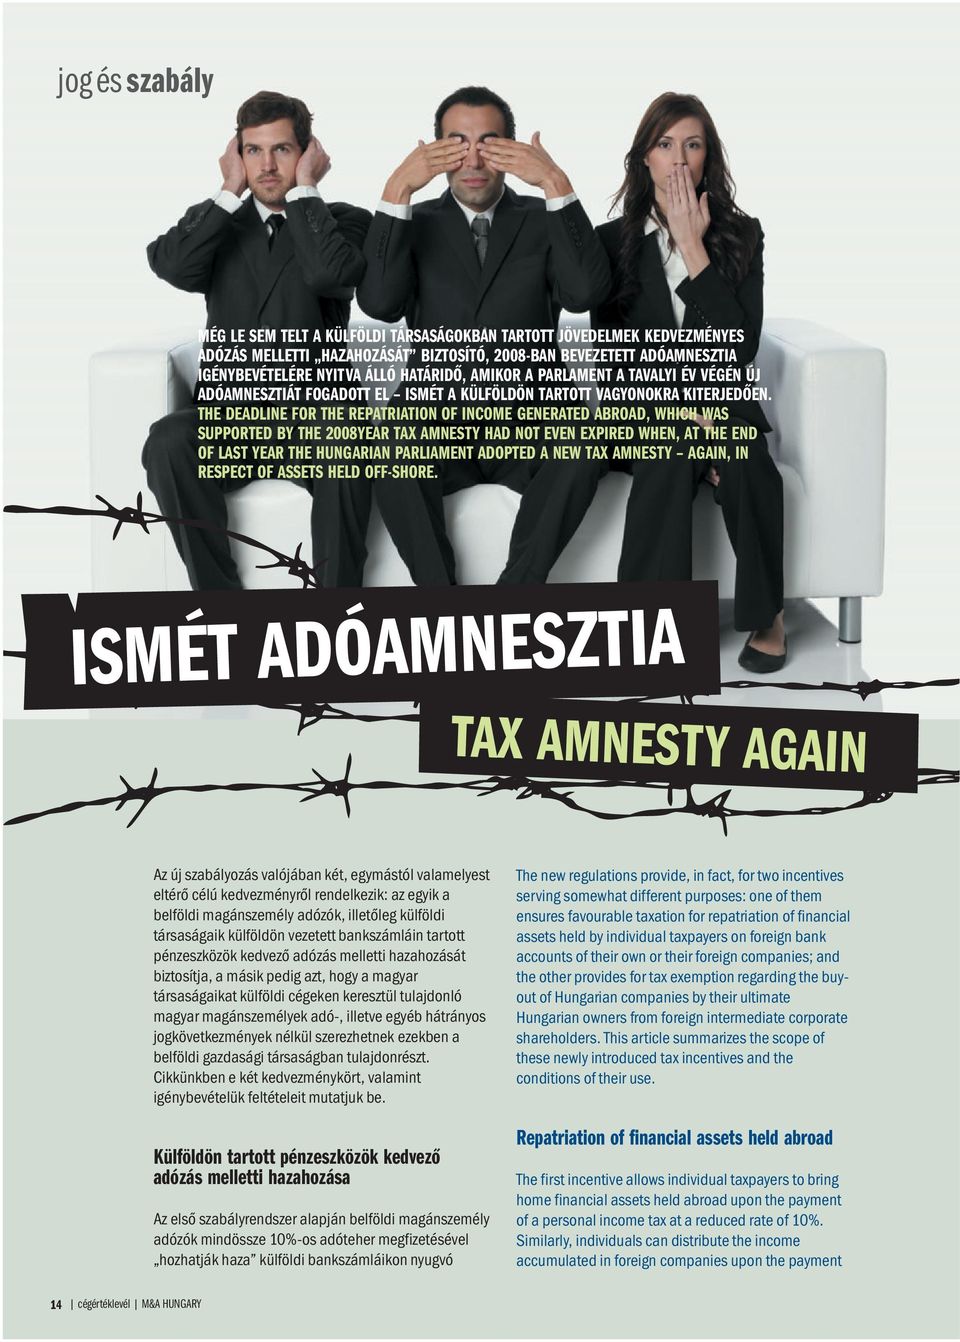 THE DEADLINE FOR THE REPATRIATION OF INCOME GENERATED ABROAD, WHICH WAS SUPPORTED BY THE 2008YEAR TAX AMNESTY HAD NOT EVEN EXPIRED WHEN, AT THE END OF LAST YEAR THE HUNGARIAN PARLIAMENT ADOPTED A NEW